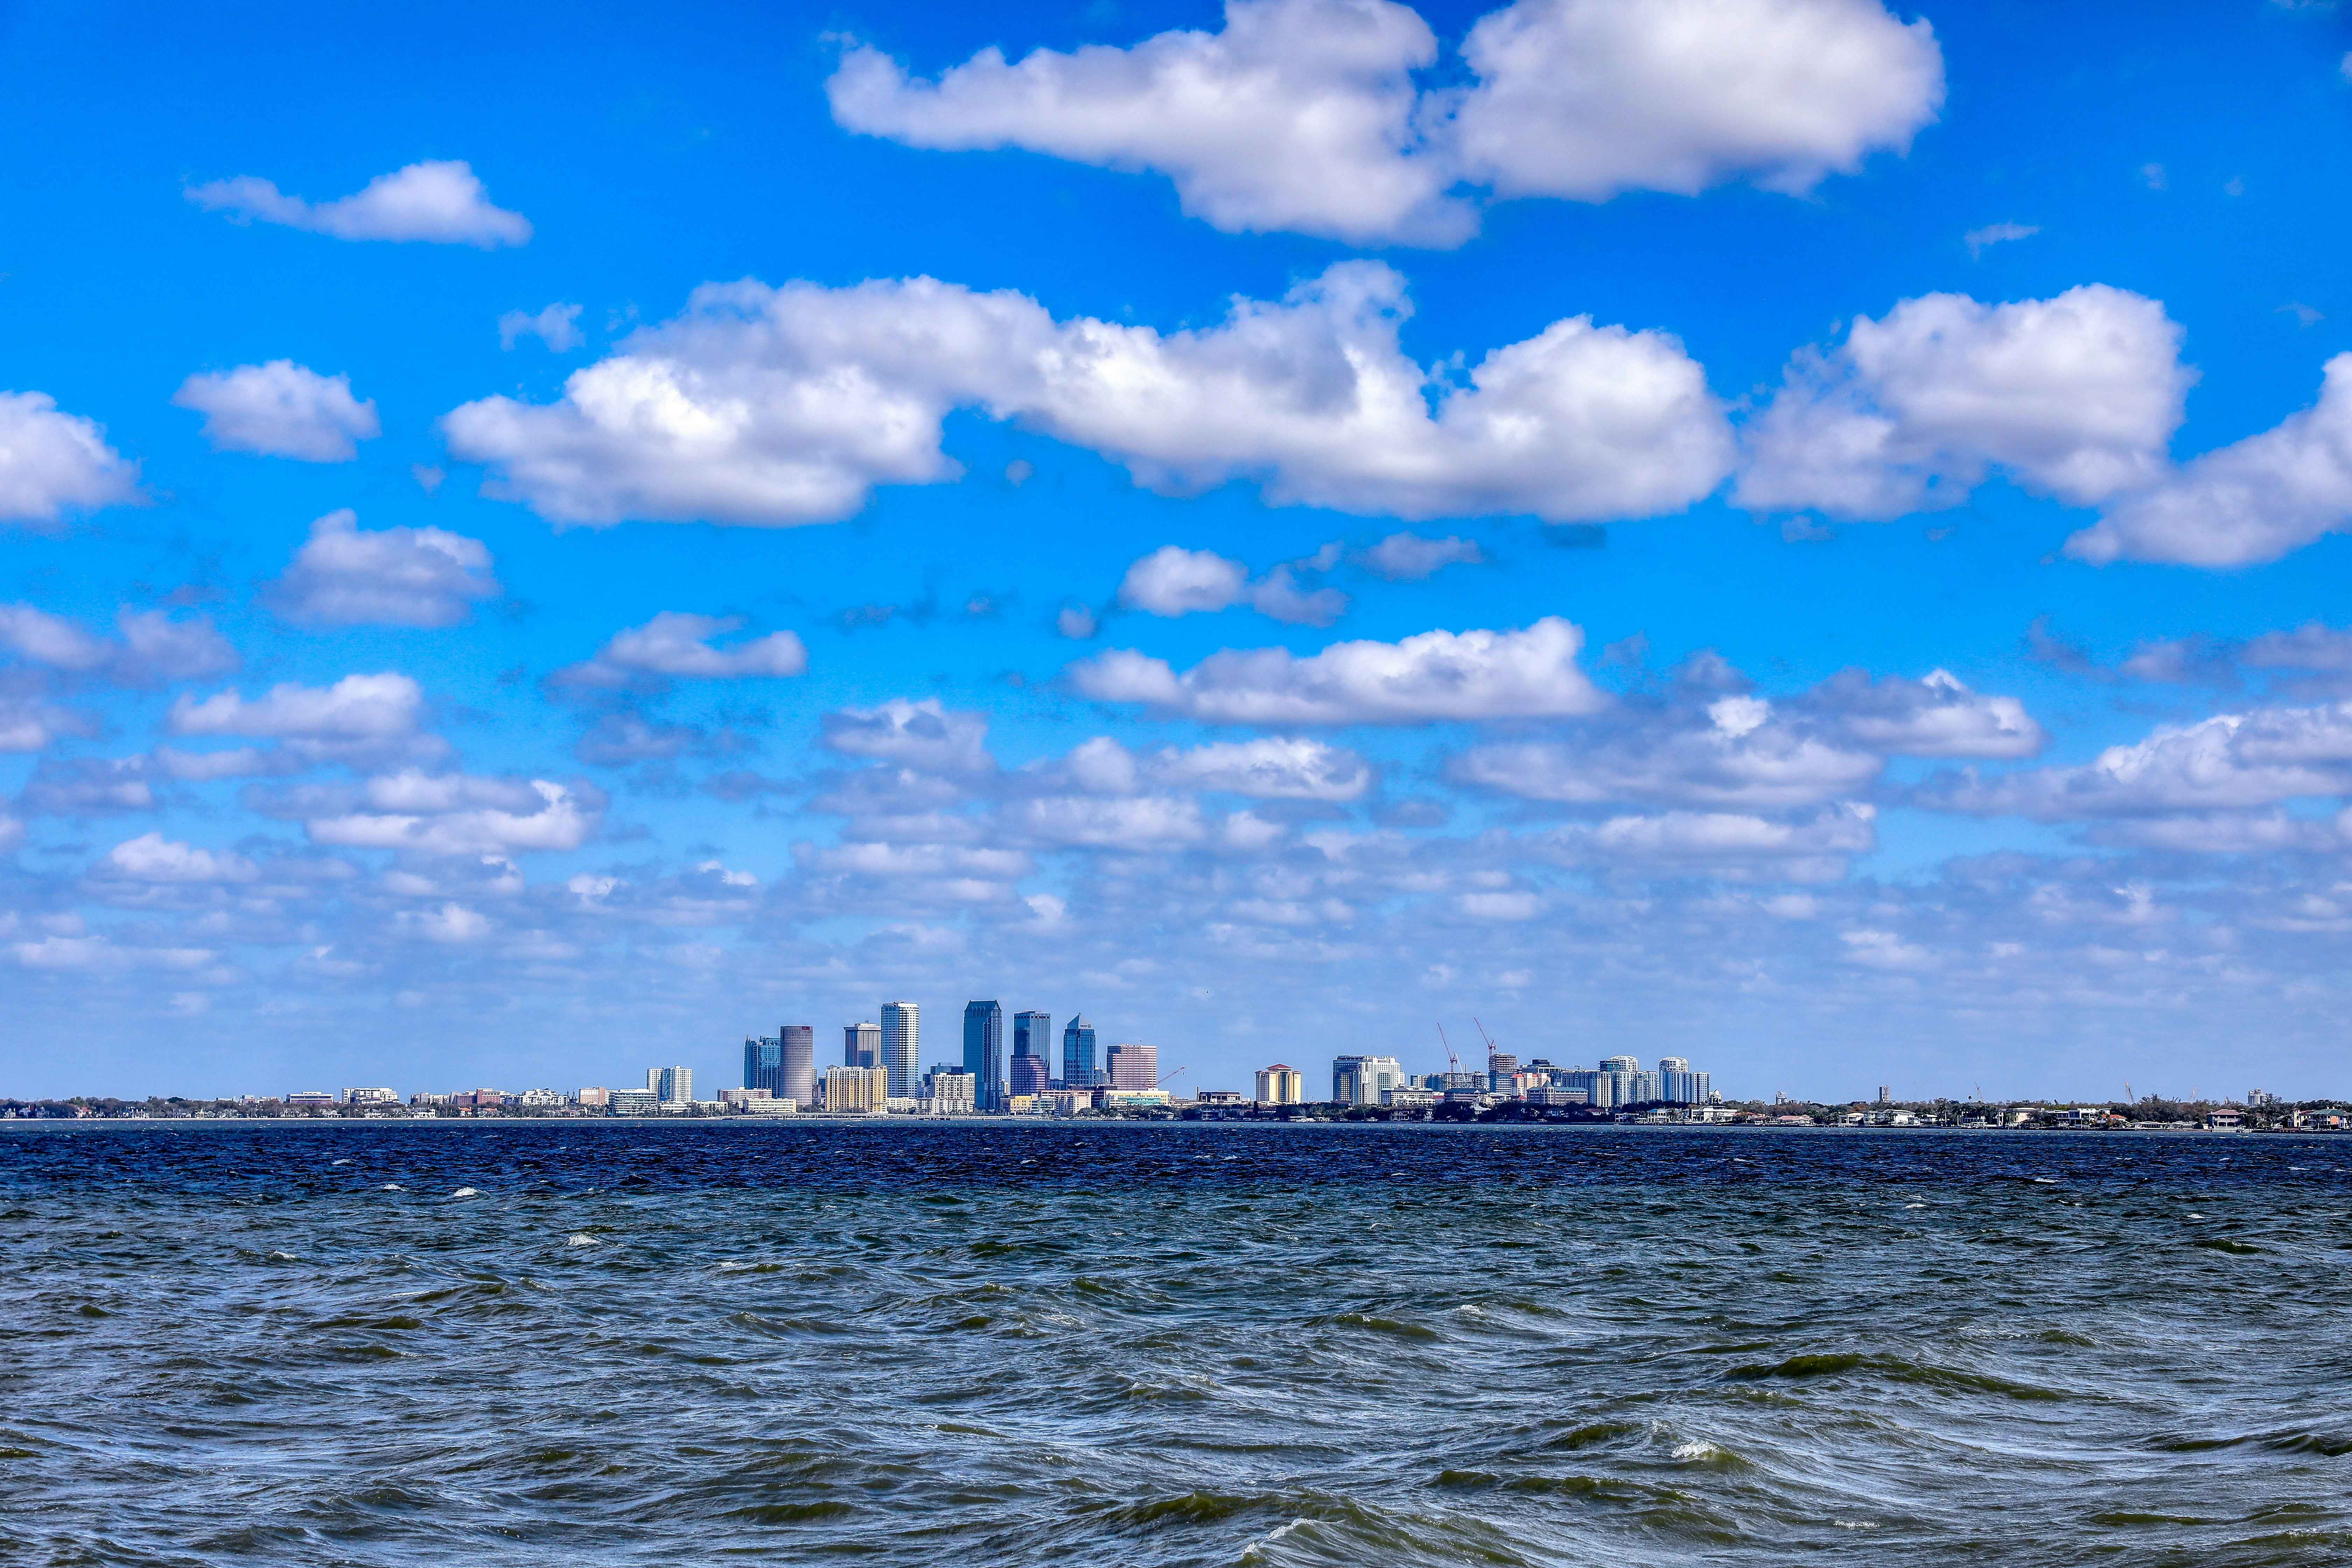 city skyline across body of water under blue and white sunny cloudy sky during daytime